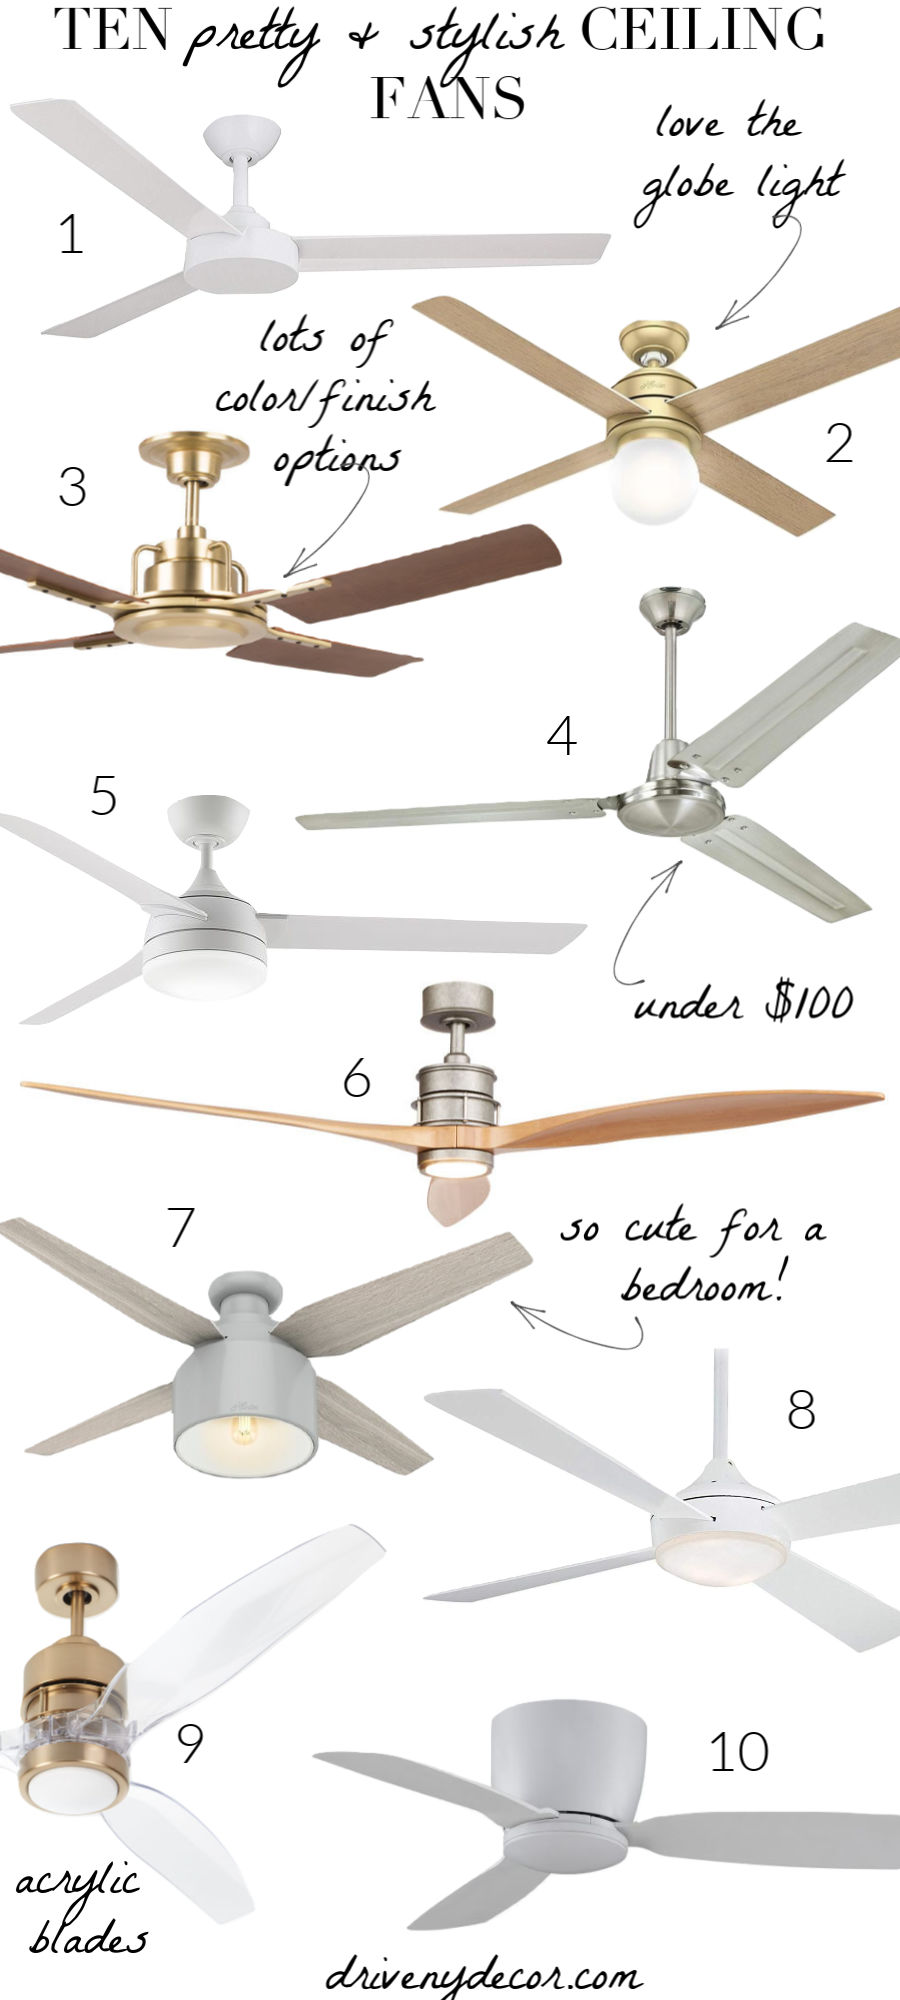 Ten Pretty Stylish Ceiling Fans It S Time To Kick Your